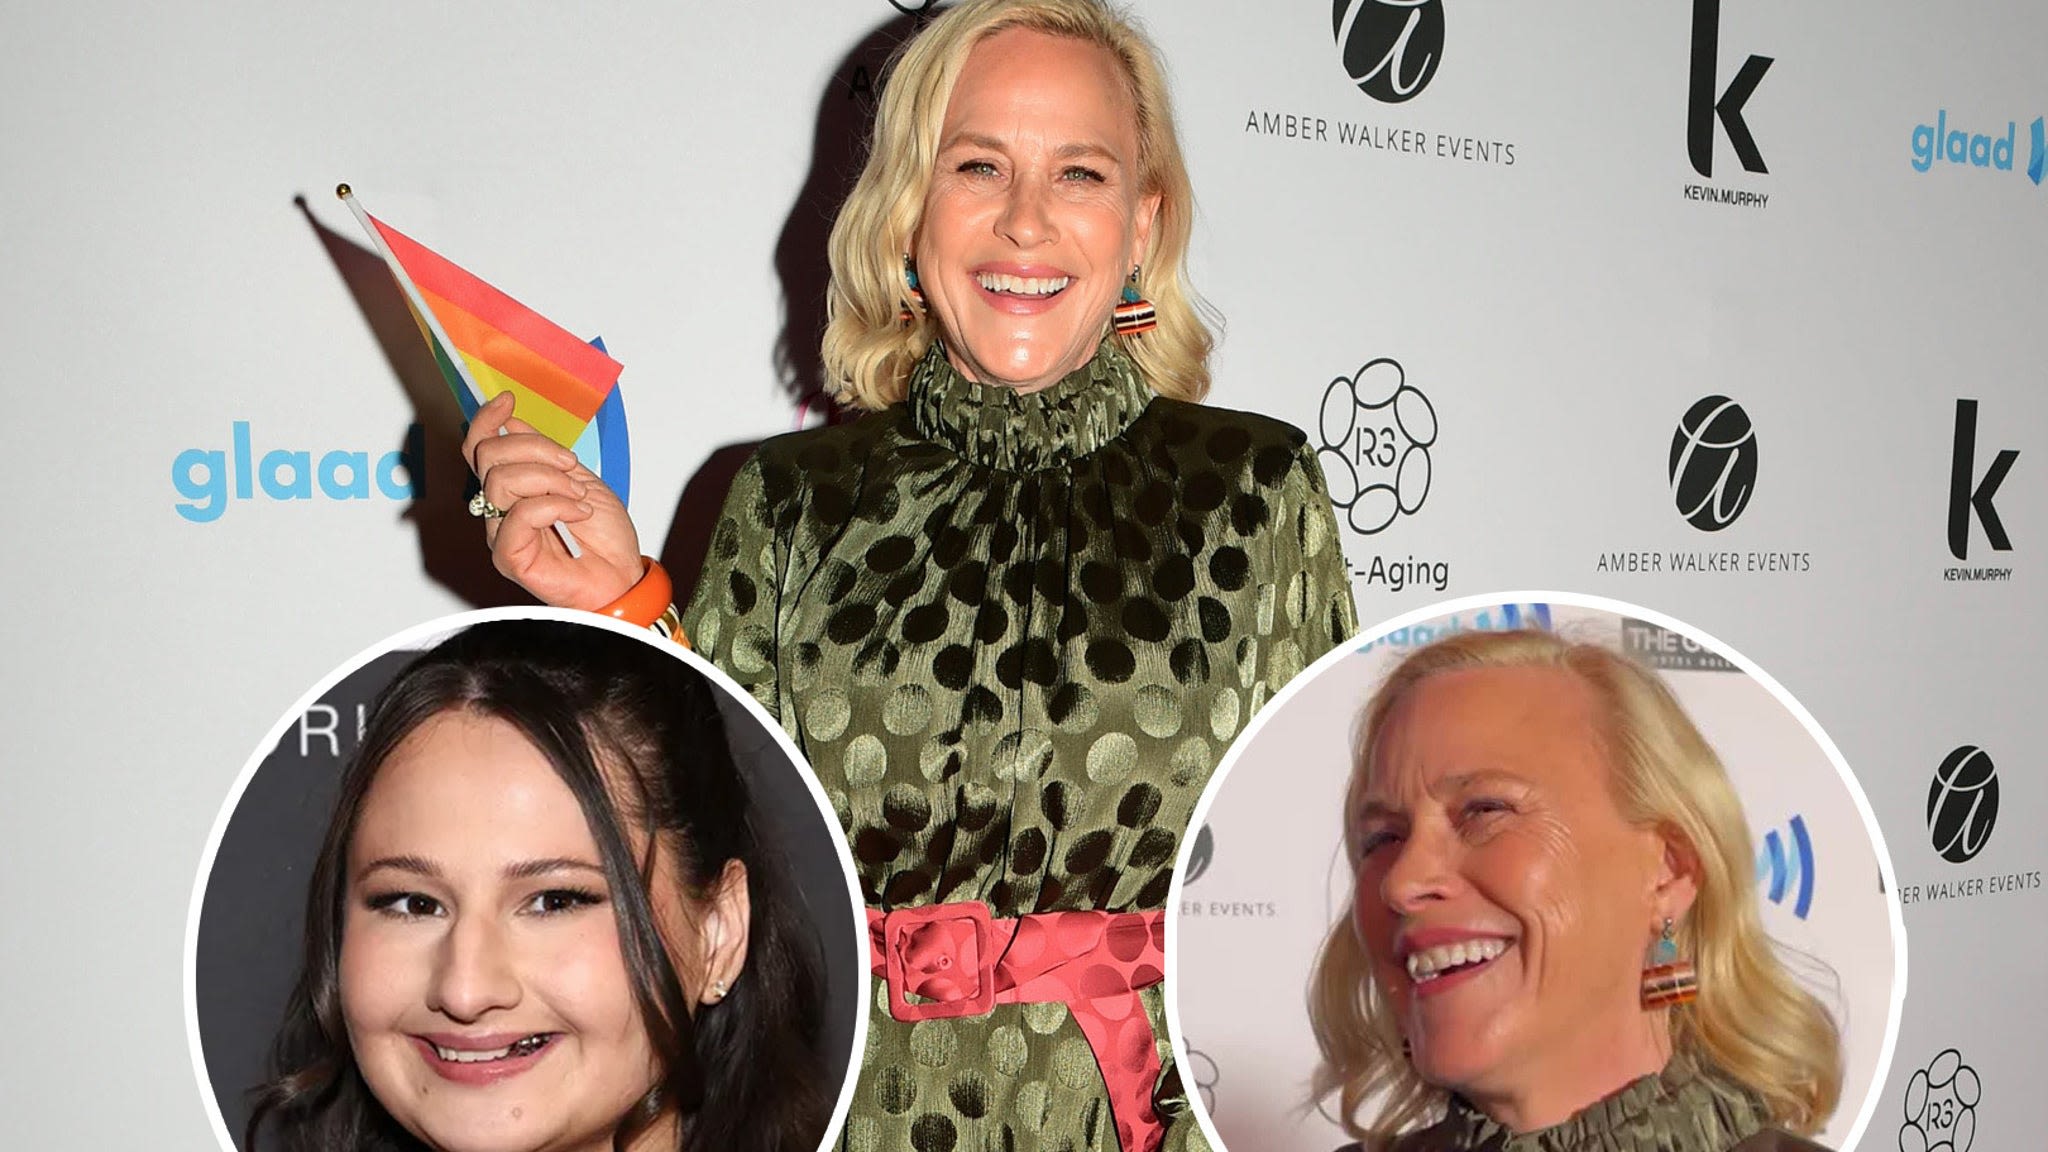 Patricia Arquette Reacts to Gypsy Rose Blanchard's Critique of Her Performance in The Act (Exclusive)